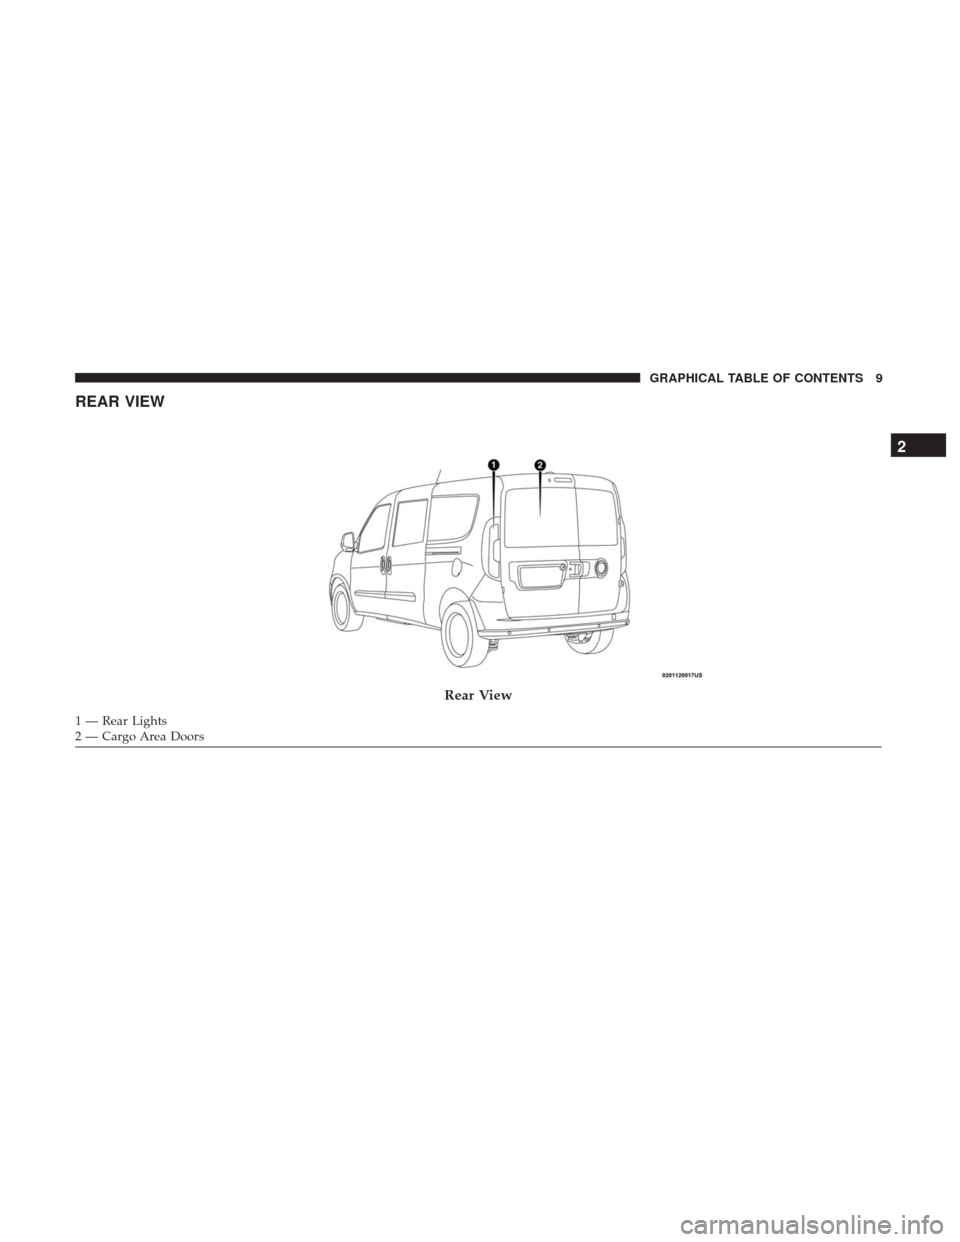 Ram ProMaster City 2018  Owners Manual REAR VIEW
Rear View
1 — Rear Lights
2 — Cargo Area Doors
2
GRAPHICAL TABLE OF CONTENTS 9 